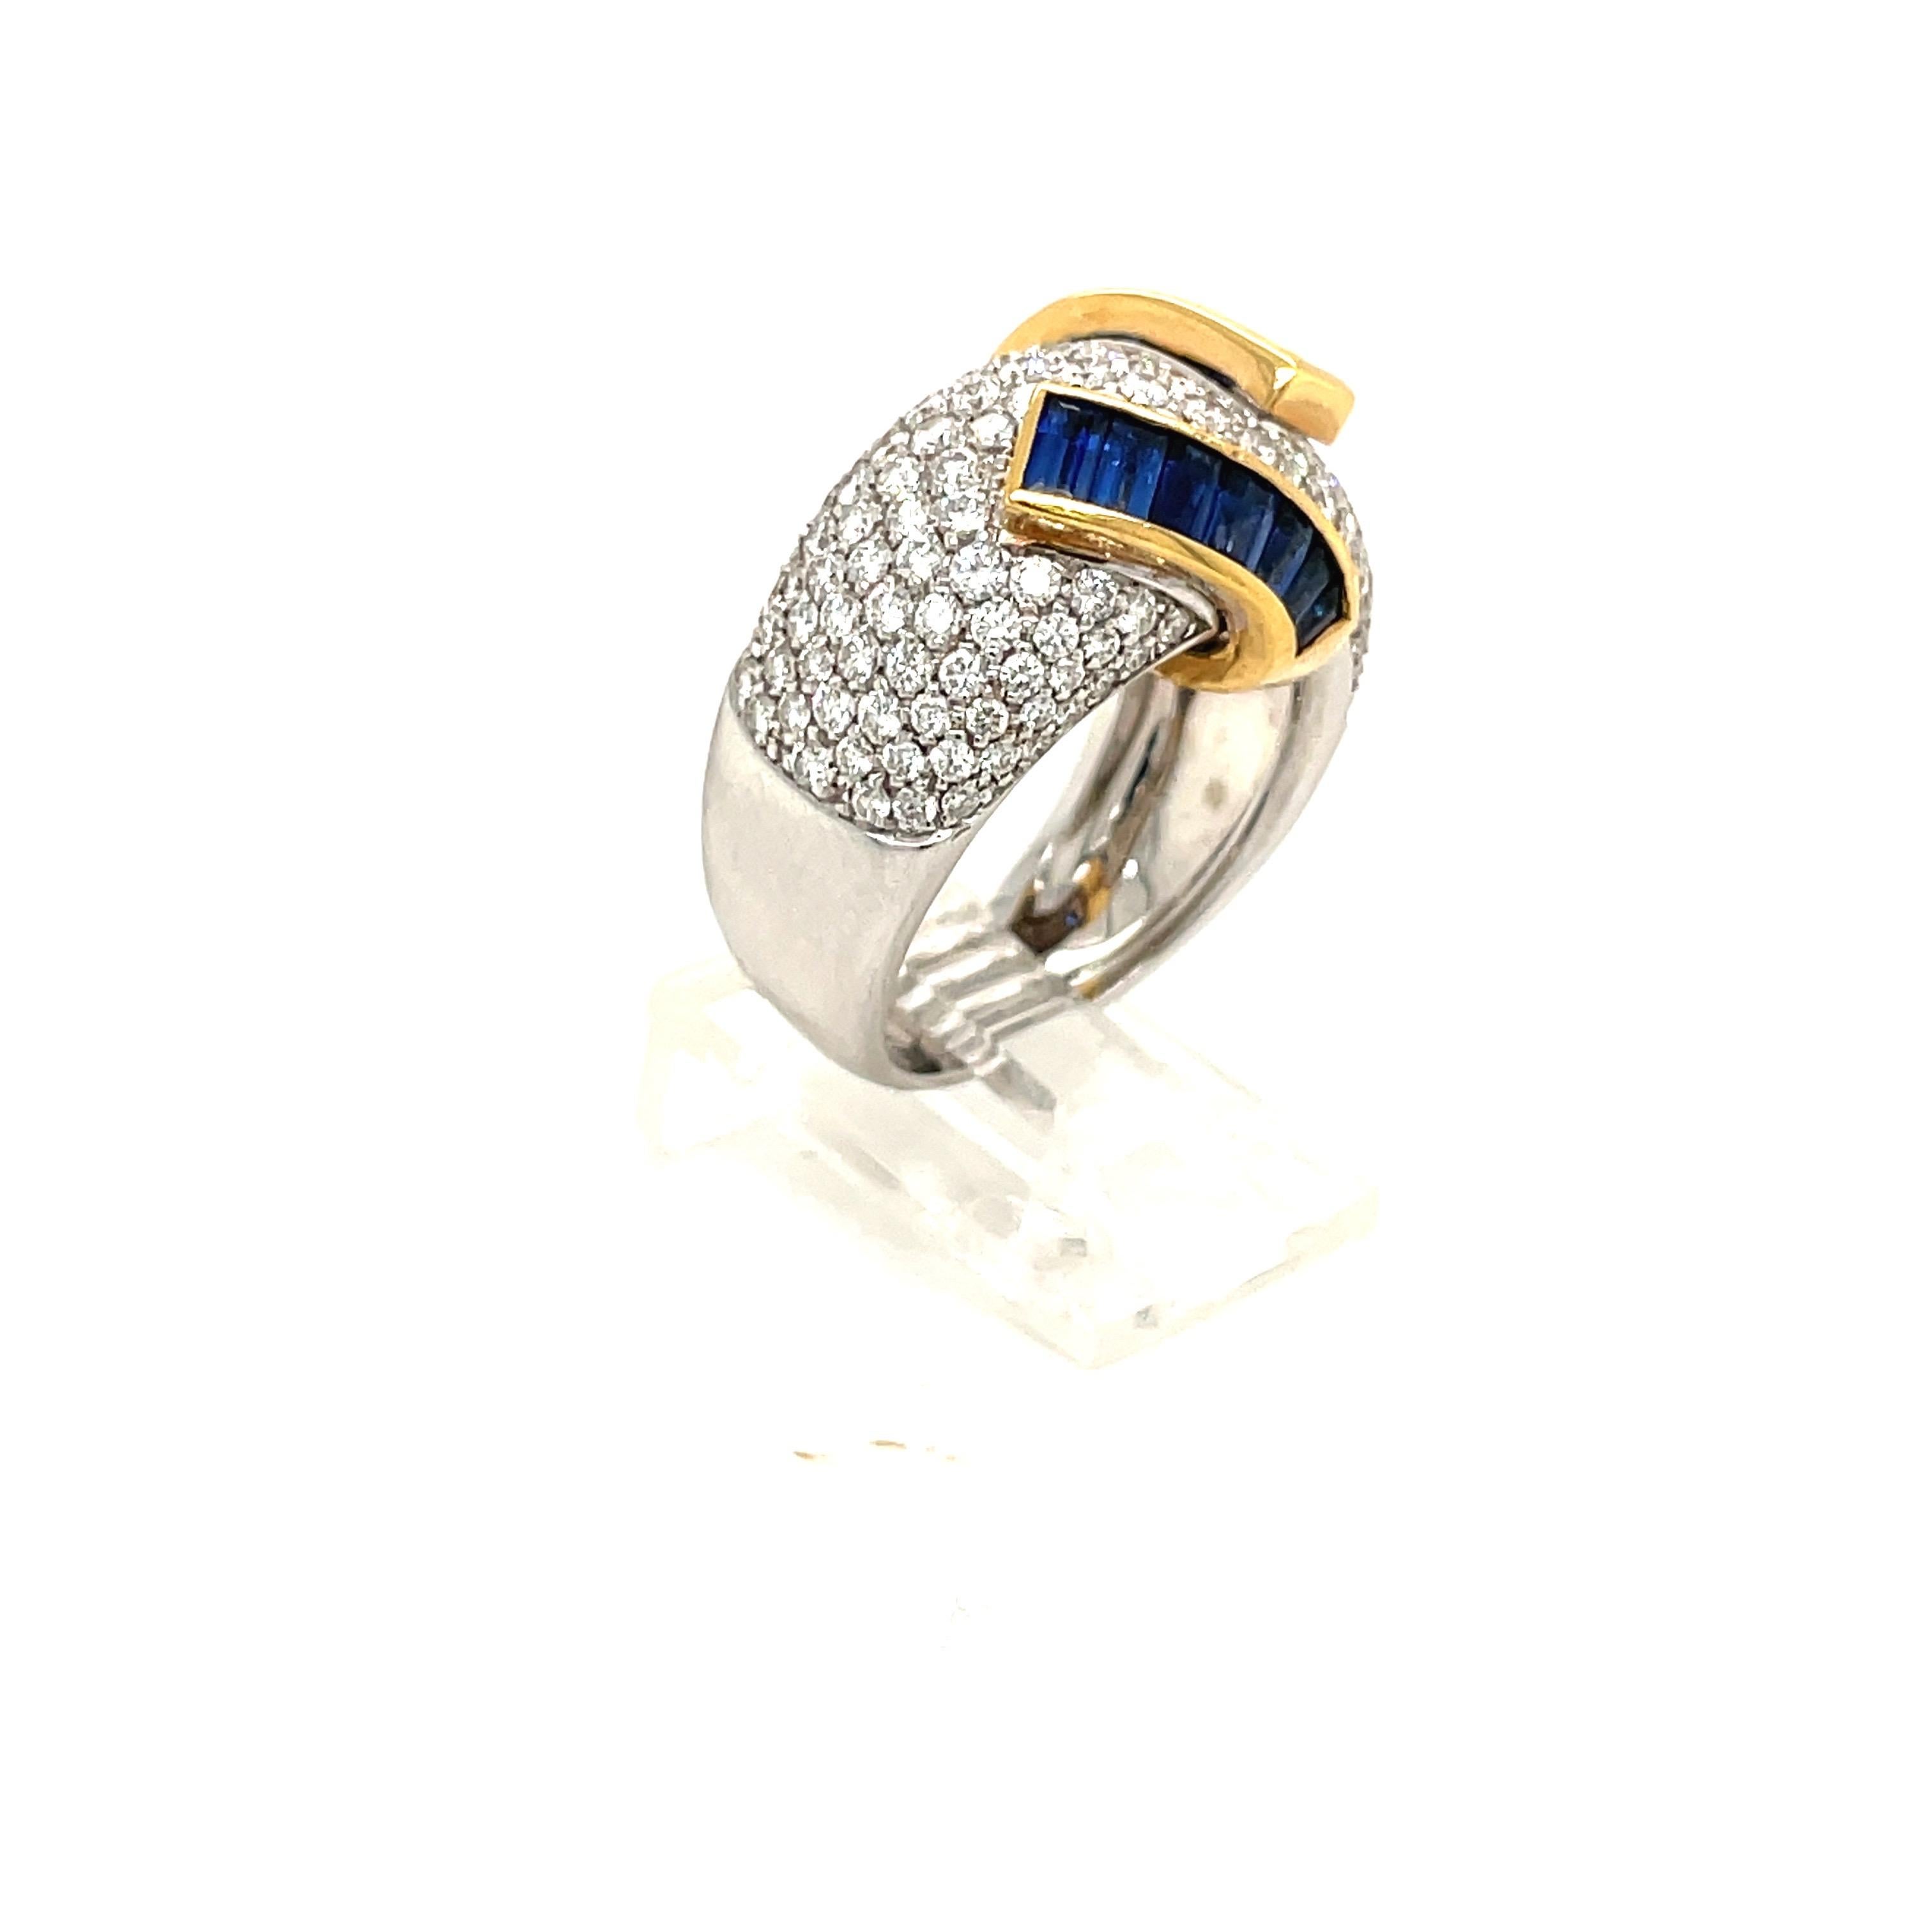 Alfiere & St. John 18KT Gold, Diamond 1.99 Carat and Blue Sapphire 2.15Ct. Ring For Sale 1